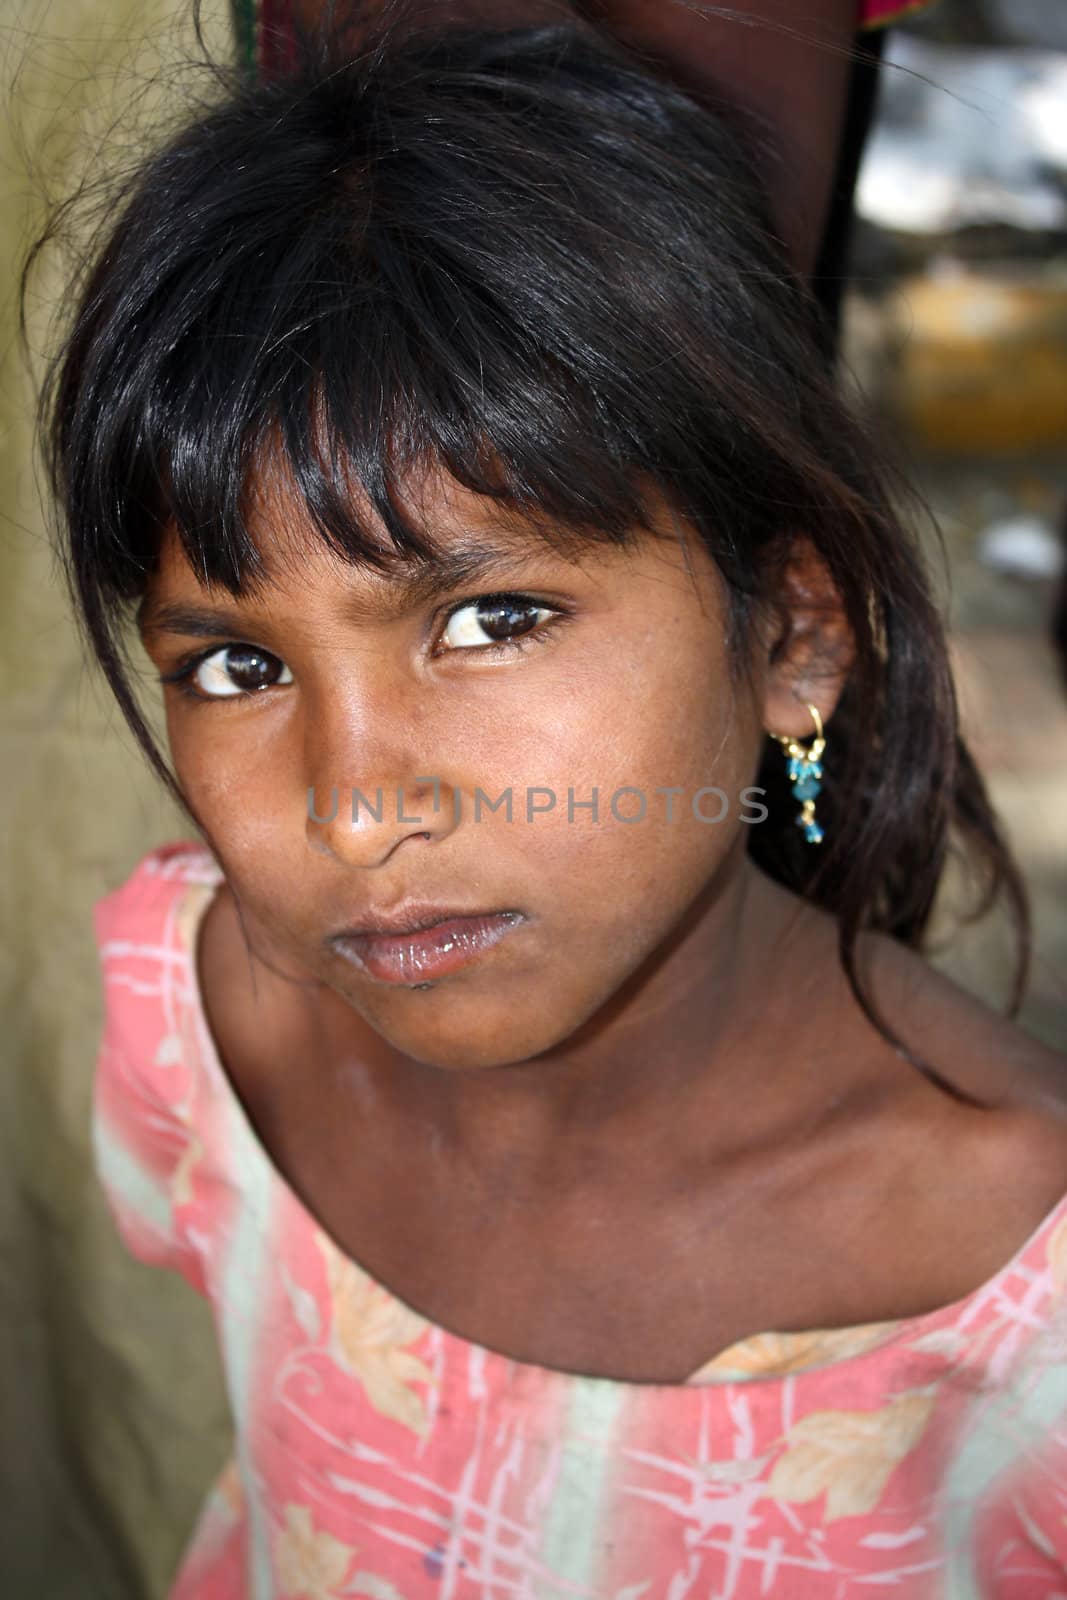 A portrait of a poor girl from India.